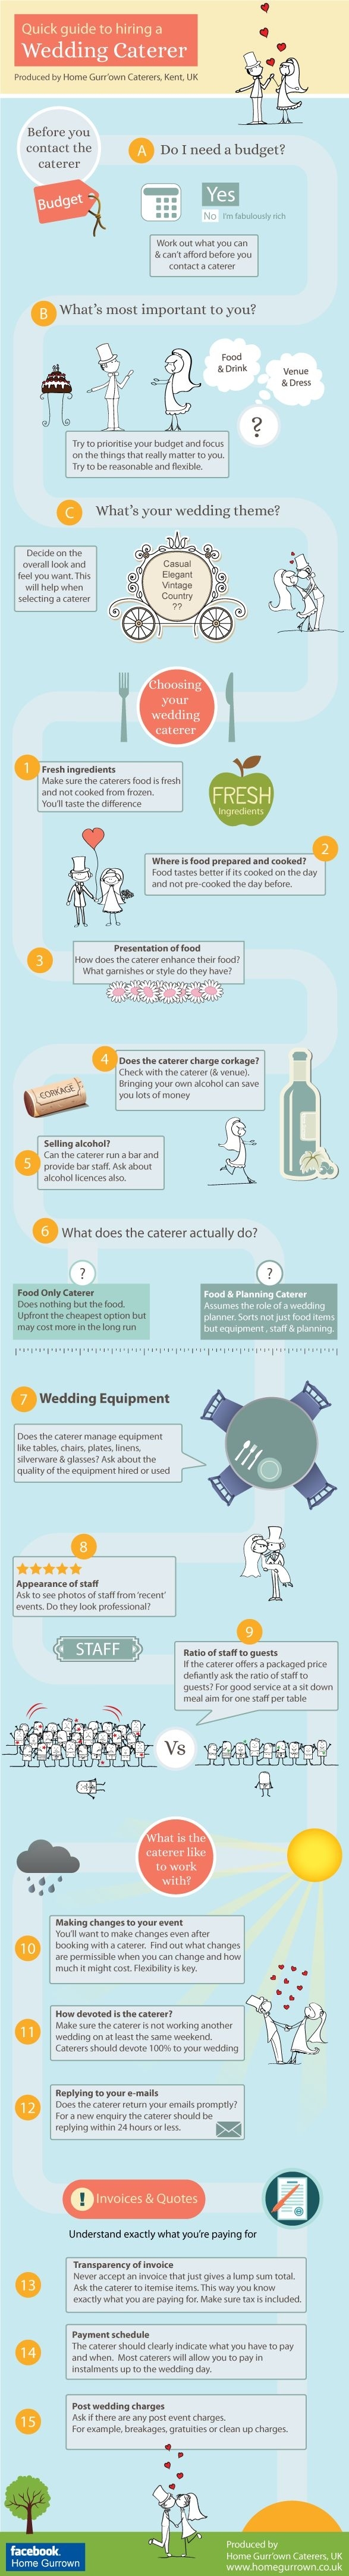 wedding planning guide - quick guide to hiring a wedding caterer